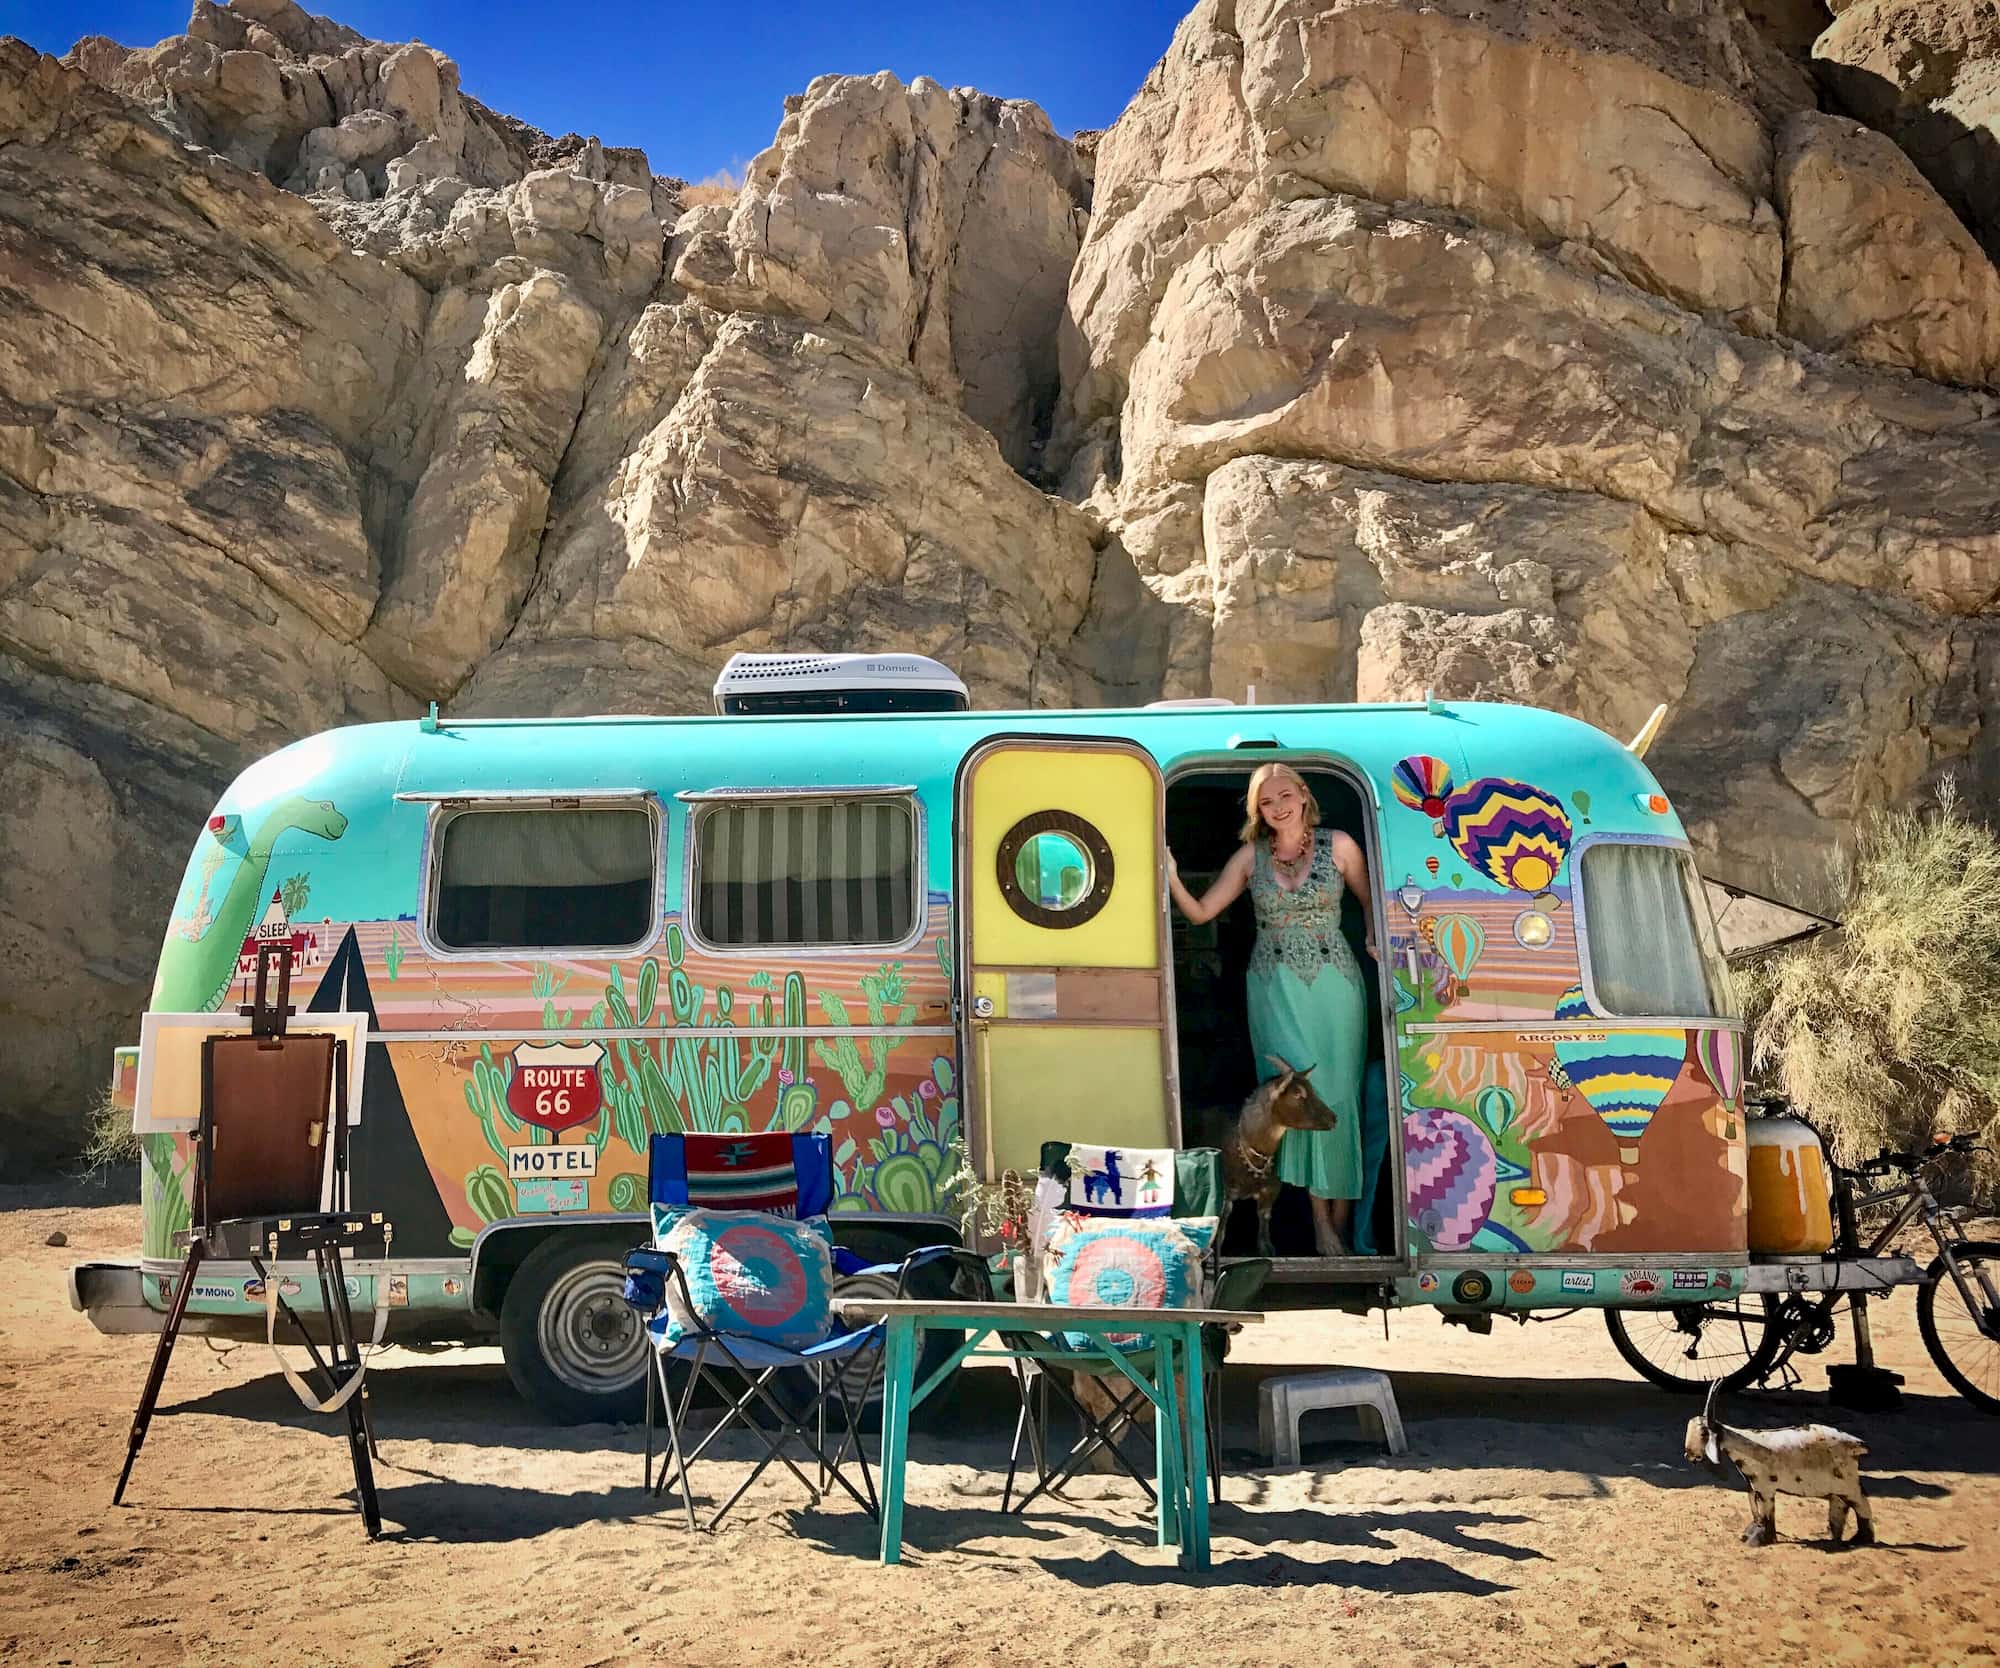 Cate of Argosey Odyssey posing with her hand painted airstream.